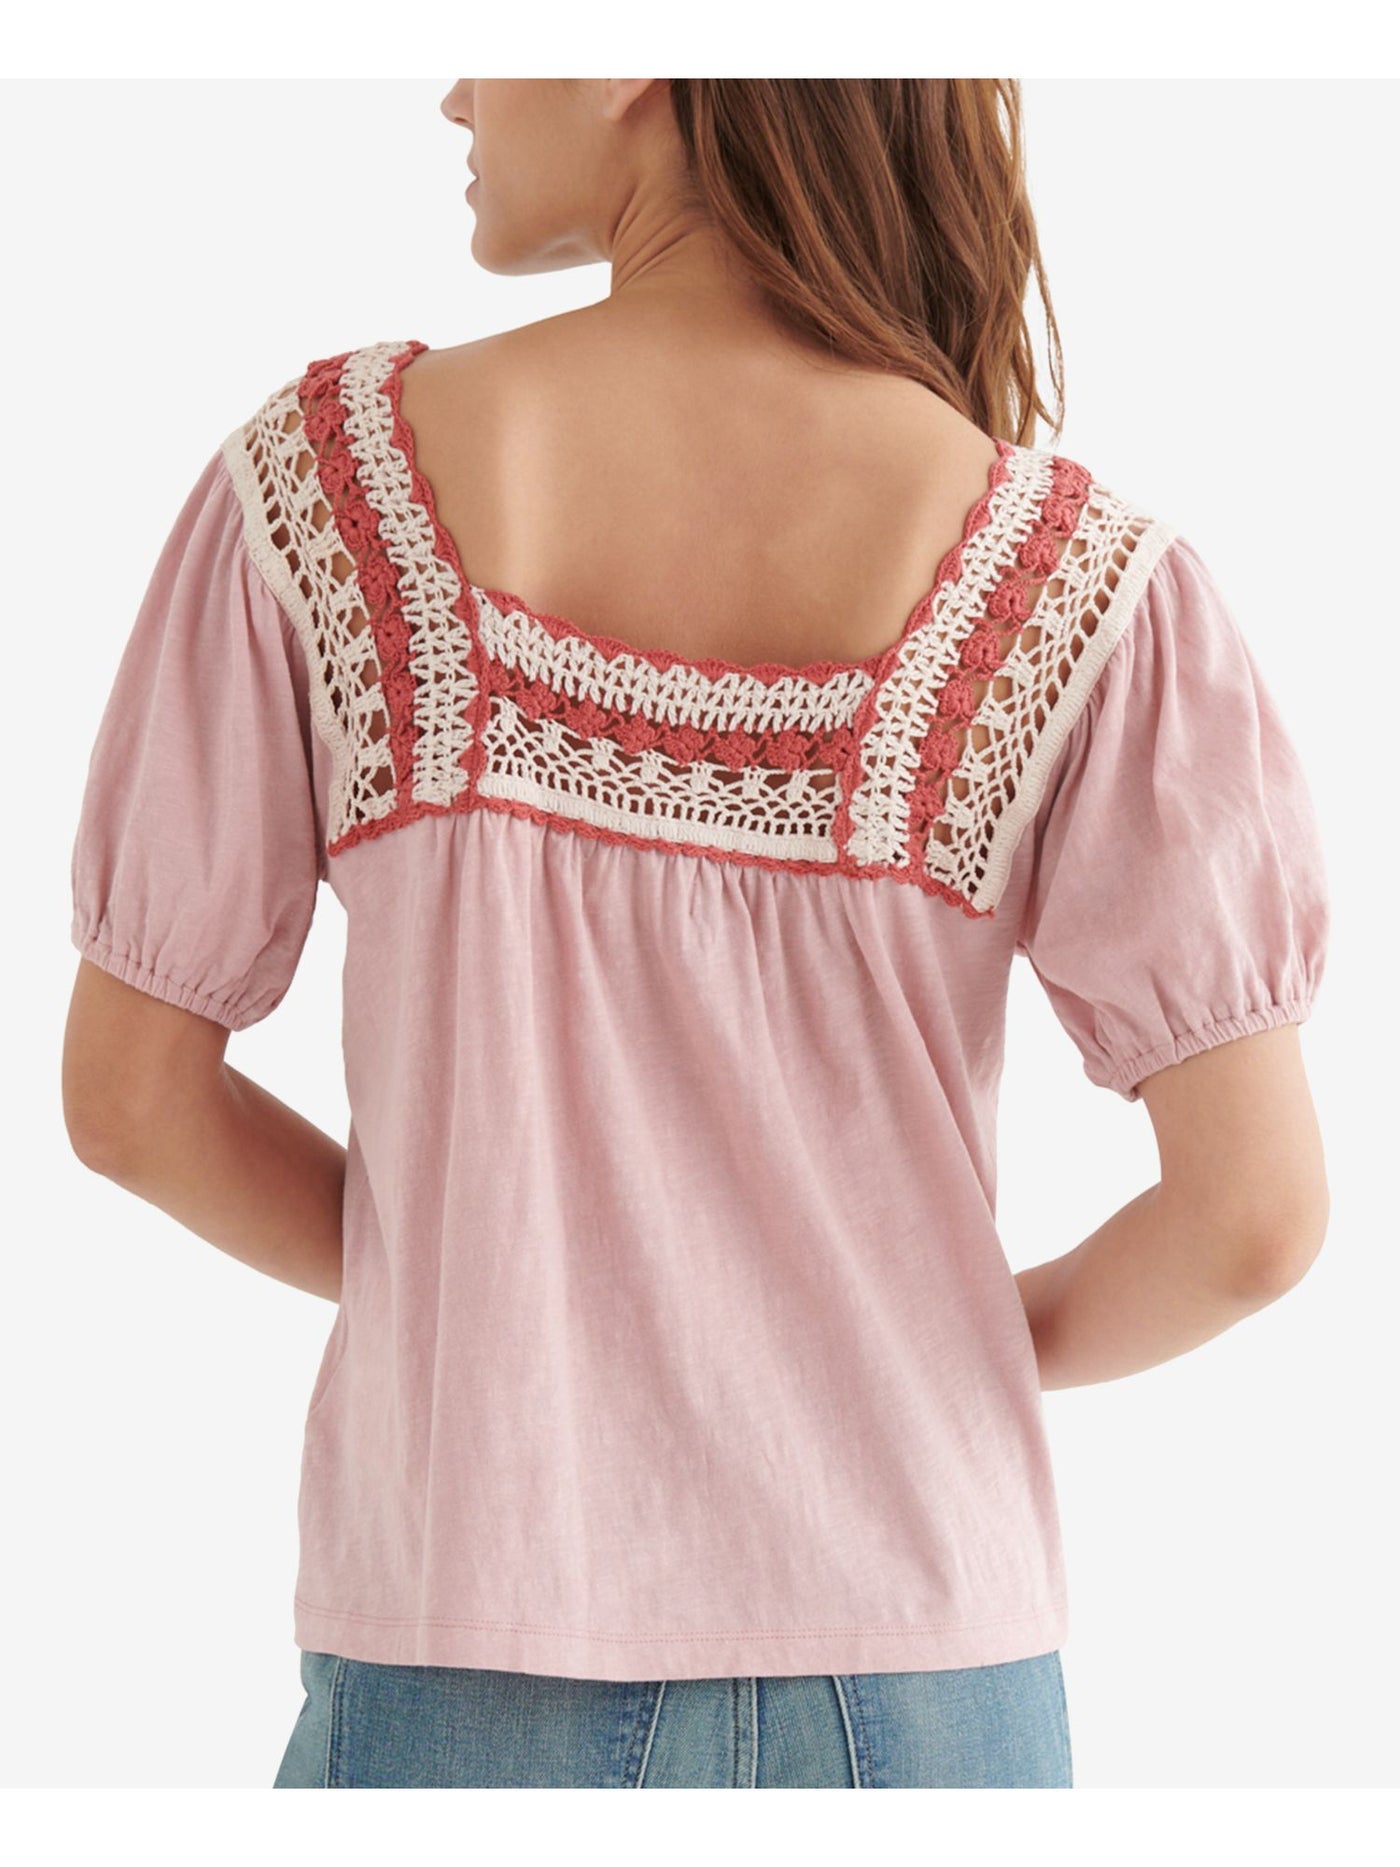 LUCKY BRAND Womens Pink Short Sleeve Square Neck Top XS